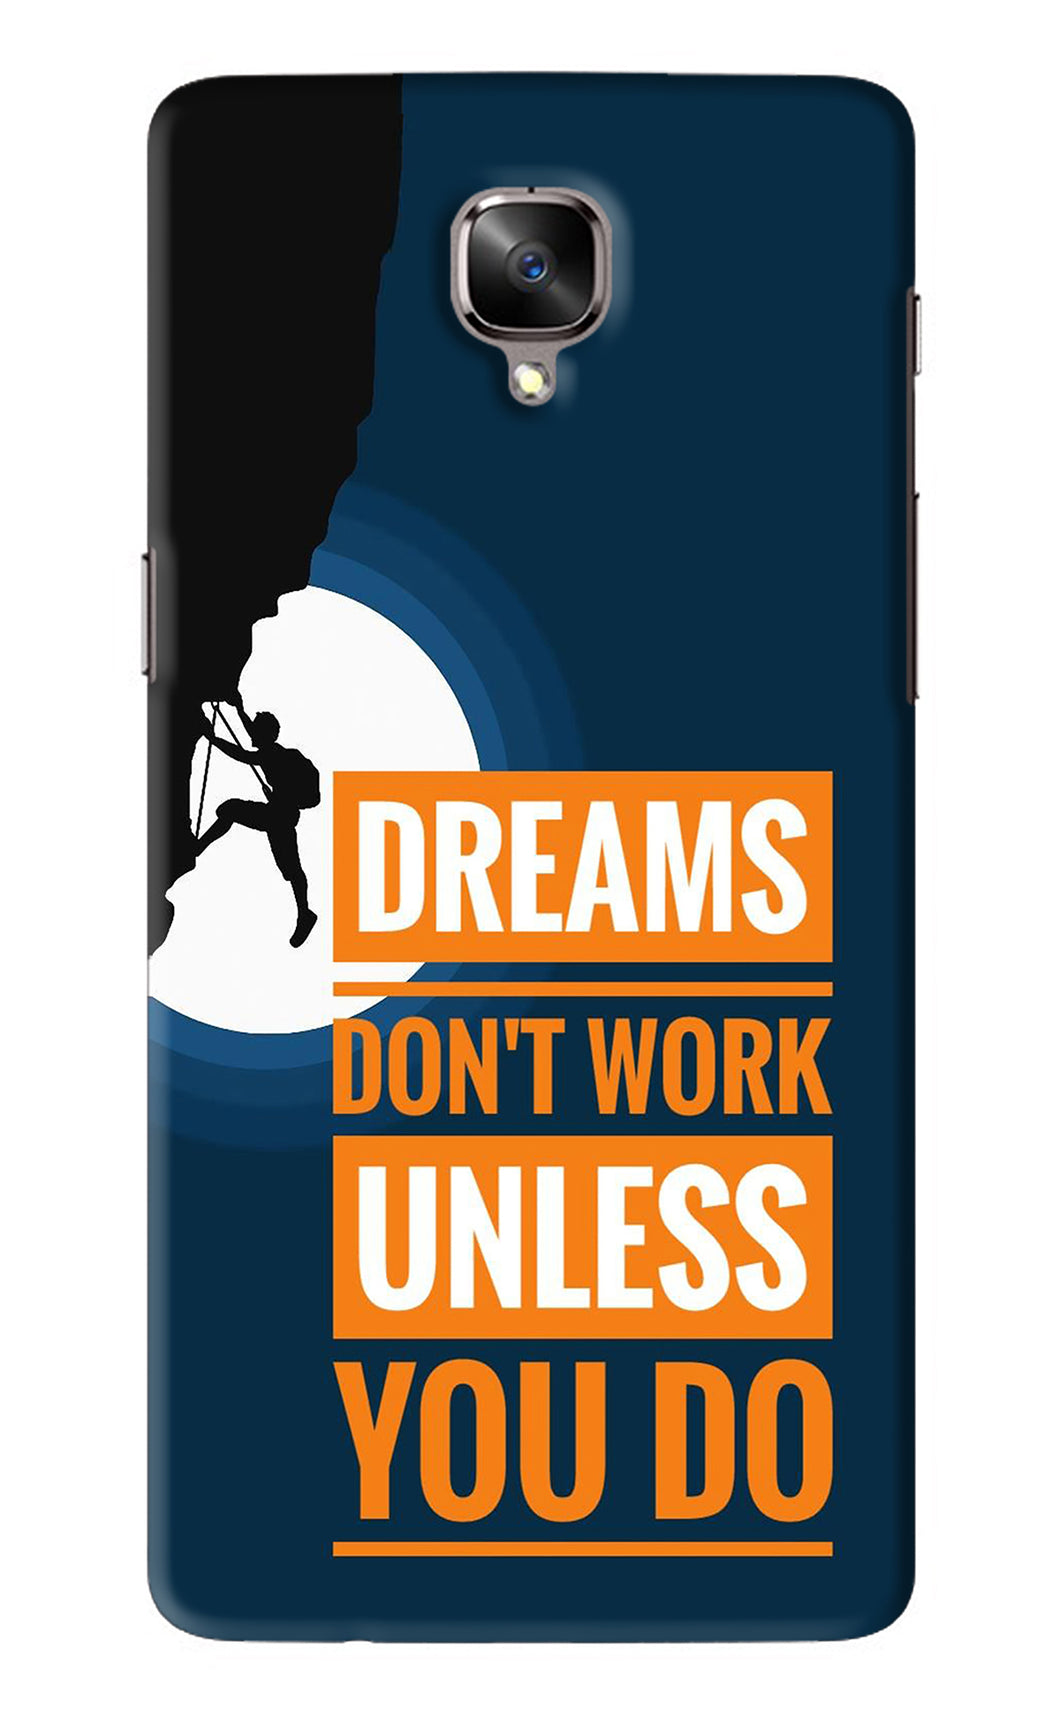 Dreams Don’T Work Unless You Do OnePlus 3 Back Skin Wrap